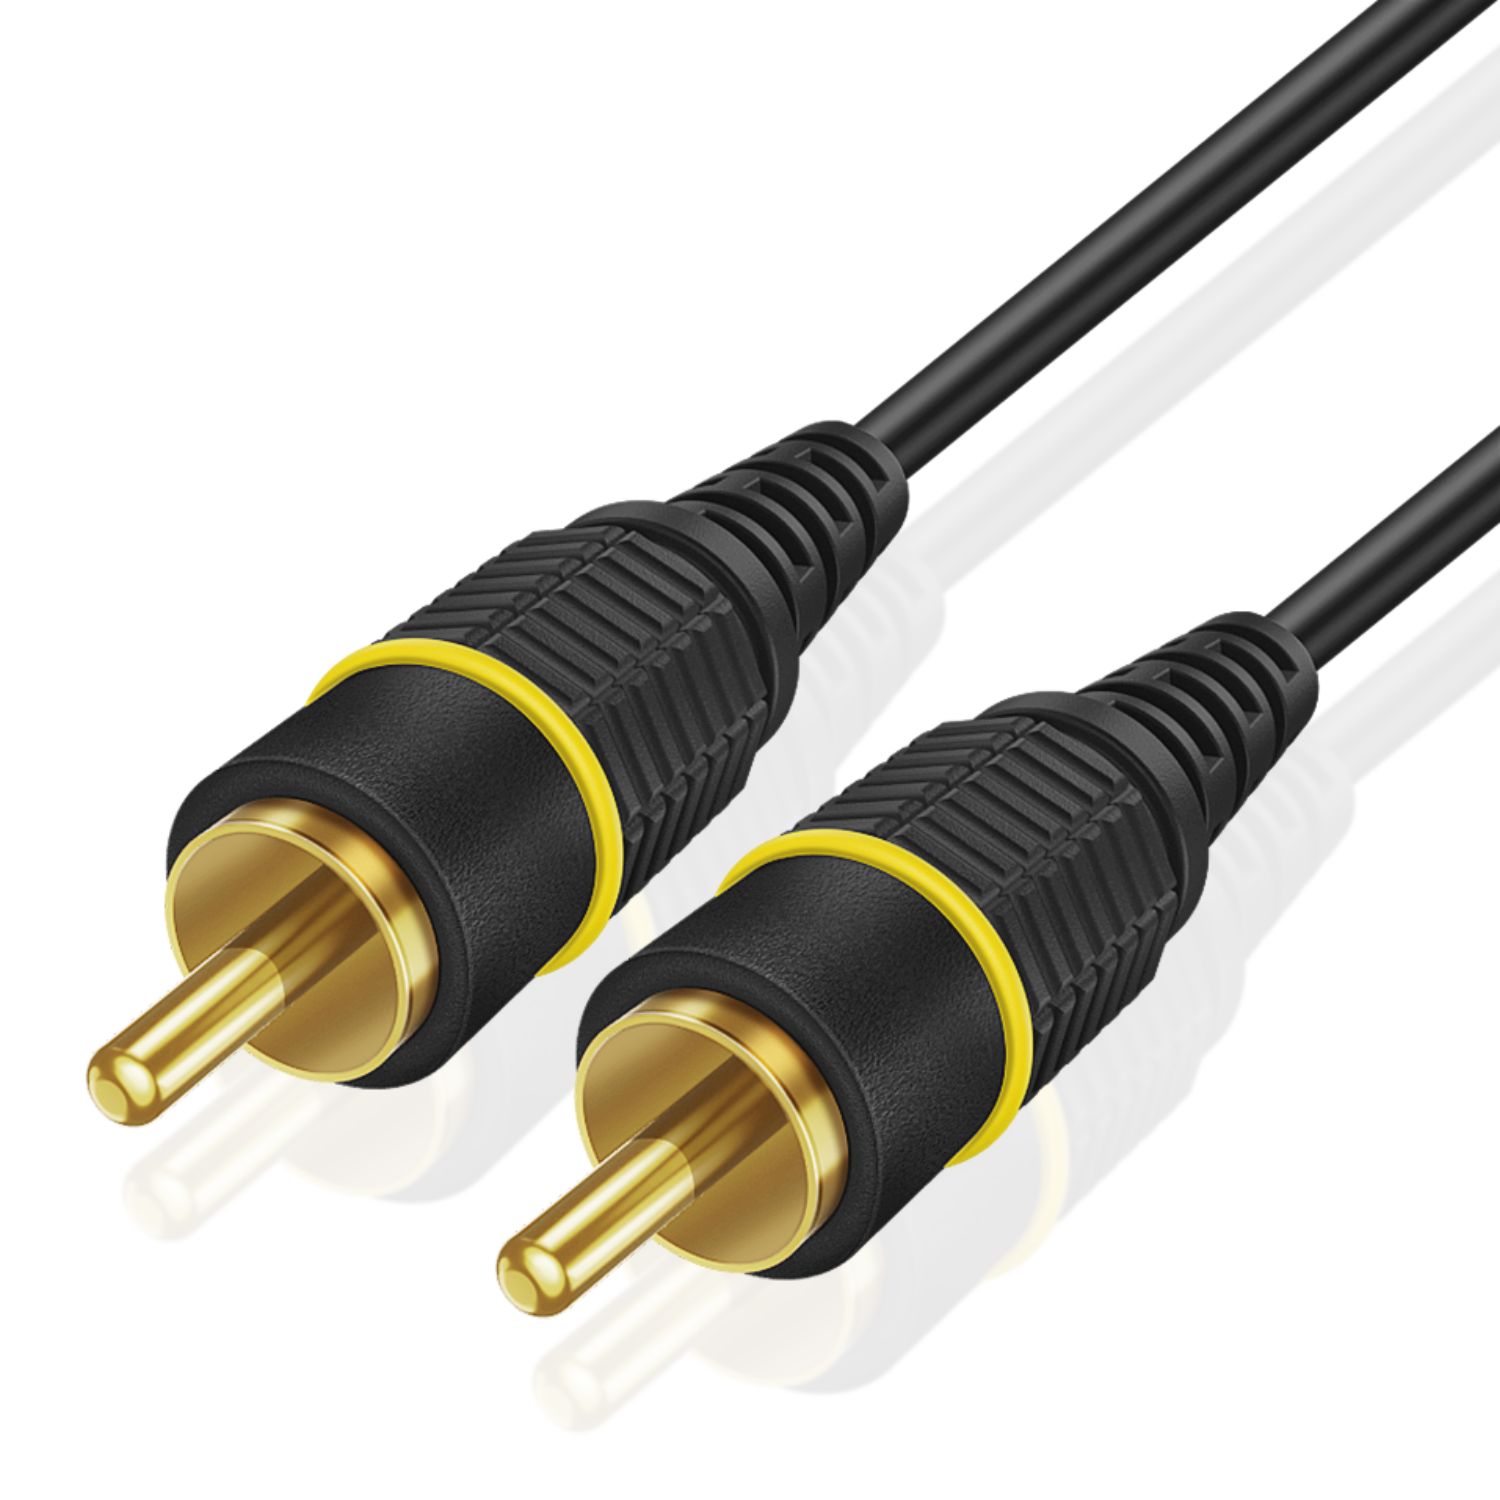 Subwoofer S/PDIF Audio Digital Coaxial RCA Composite Video Cable (15 Feet) - Gold Plated Dual Shielded RCA to RCA Male Connectors - Black - image 1 of 6